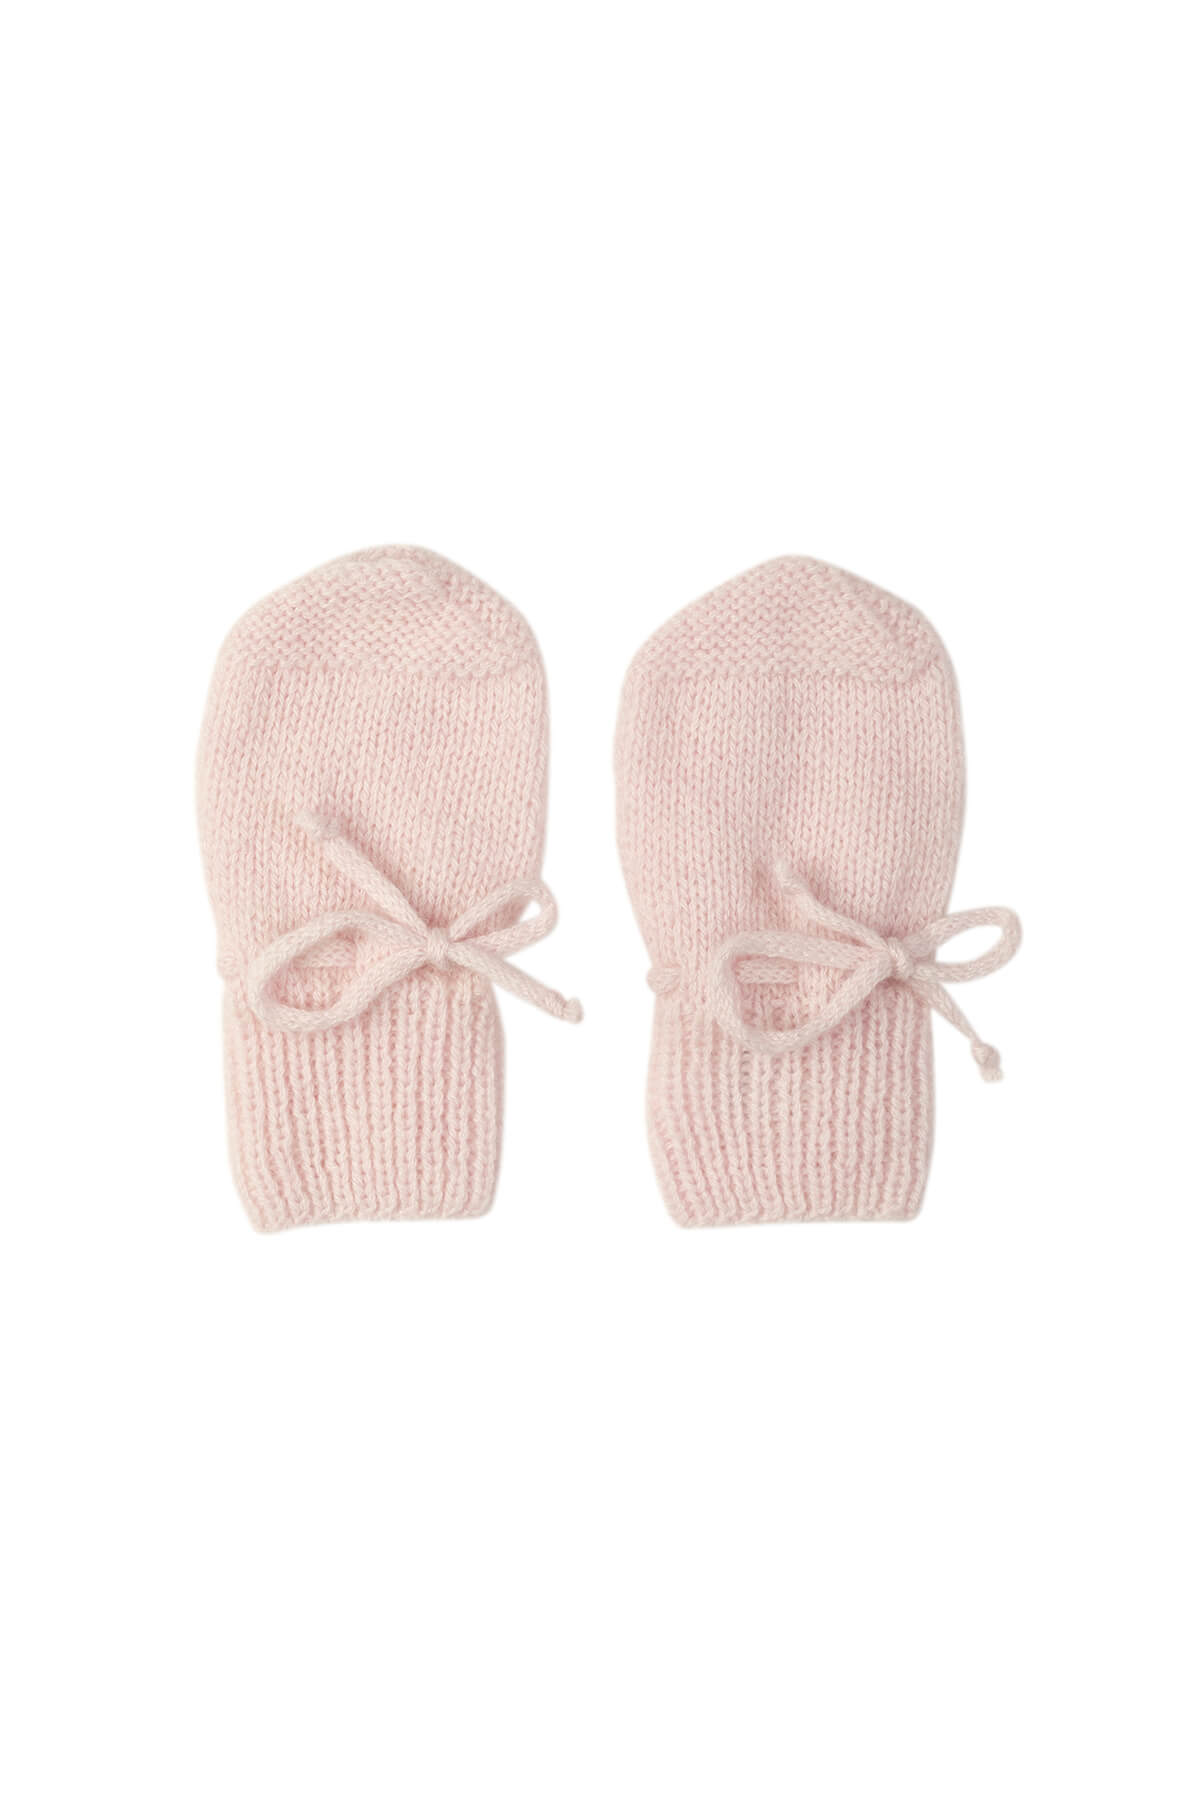 Johnstons of Elgin Hand Knitted Cashmere Baby Mittens in Blush on white background 61710P191ONE